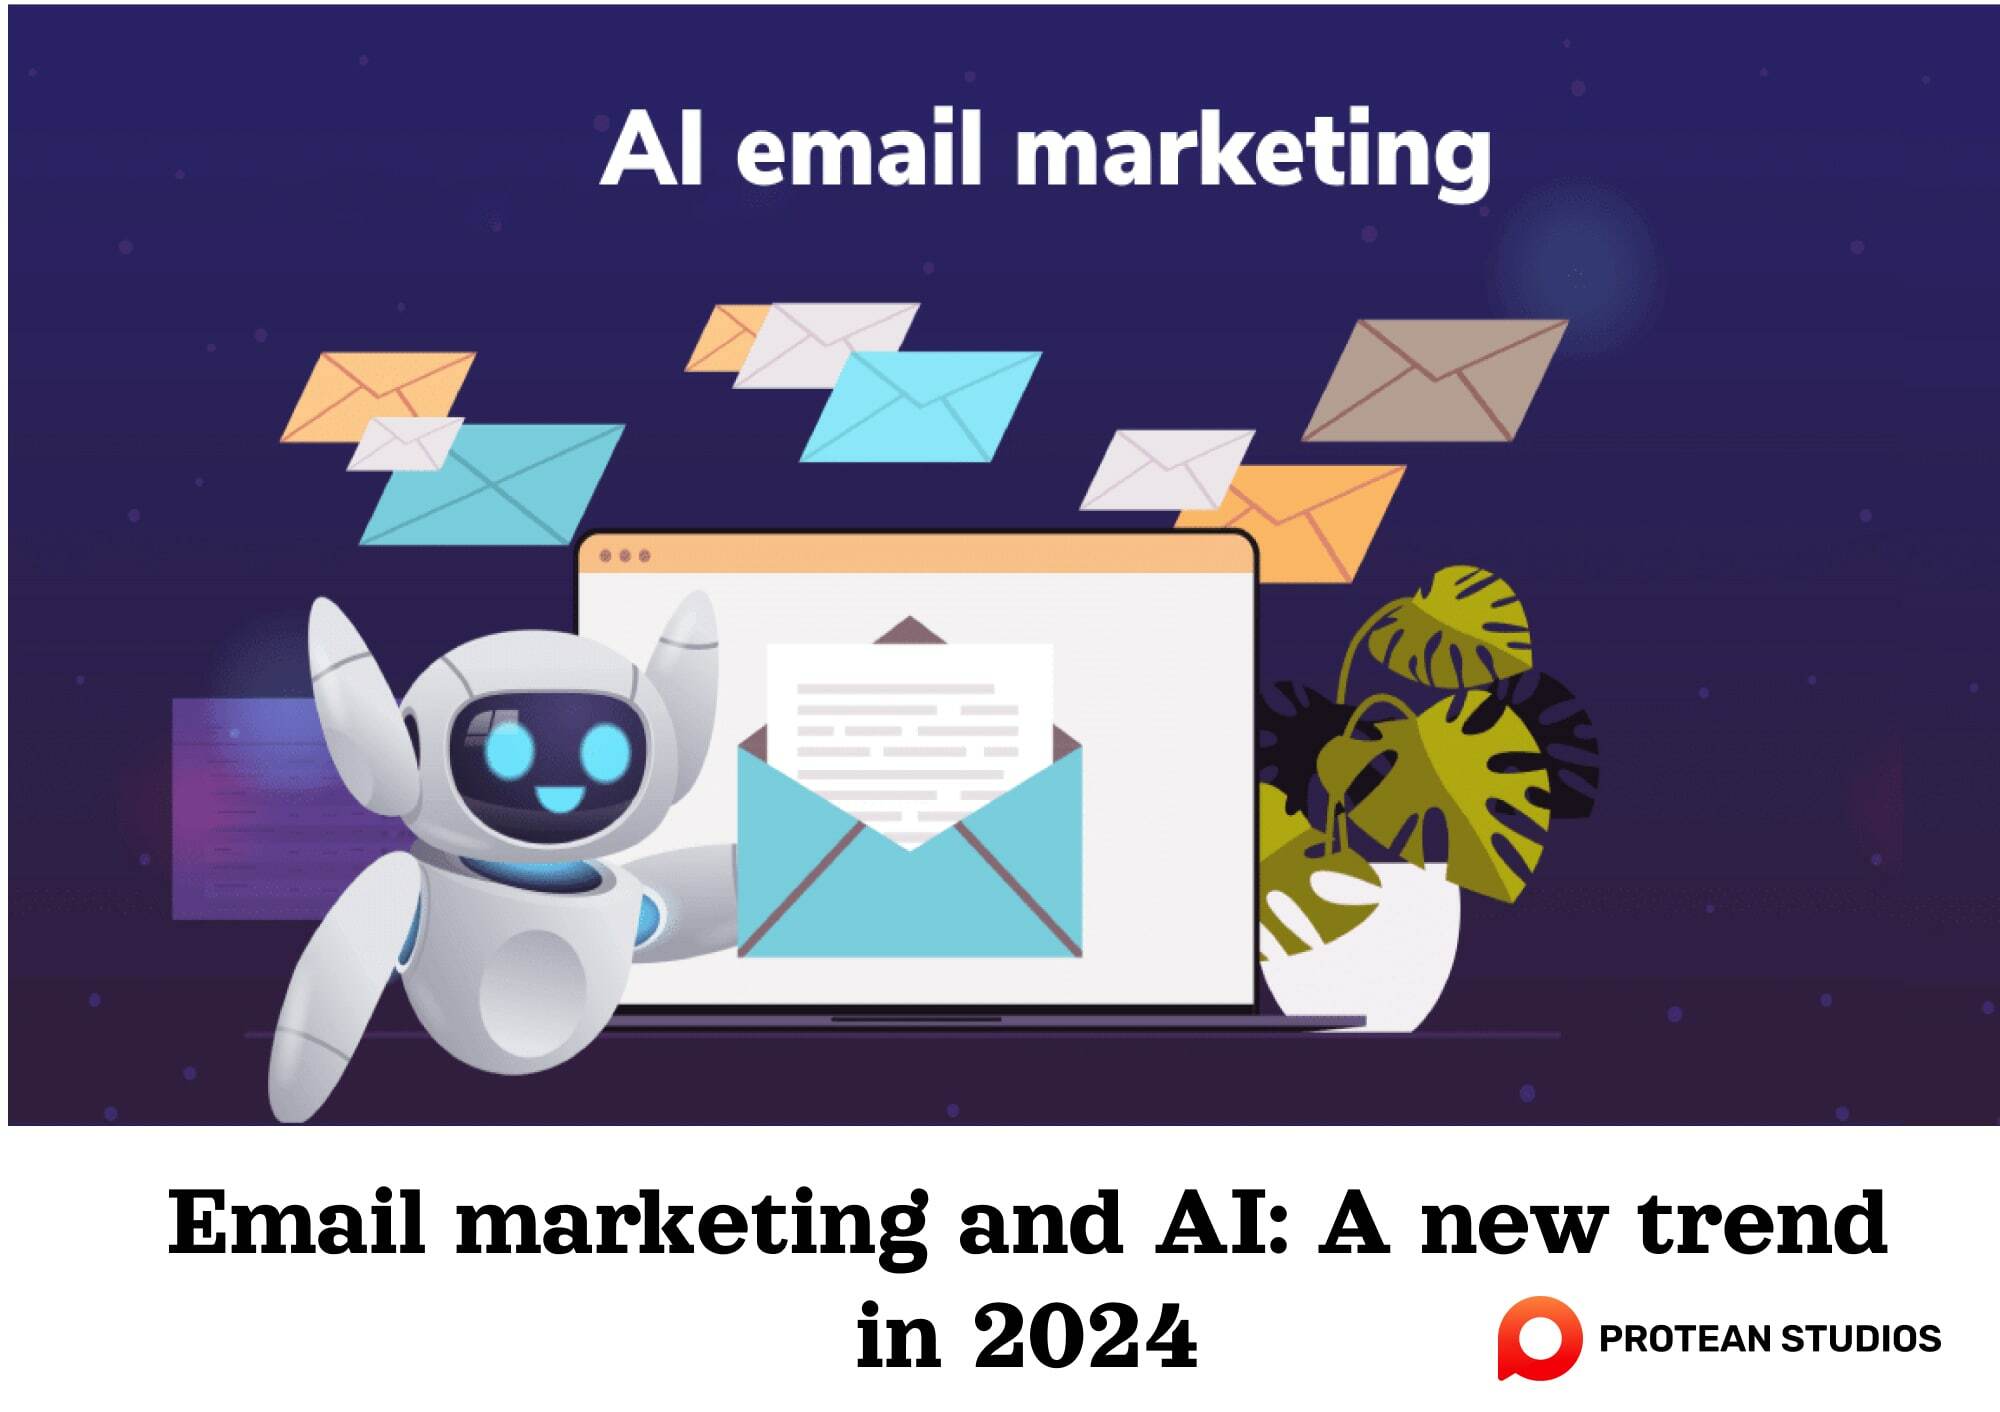 Integrate AI in the email marketing